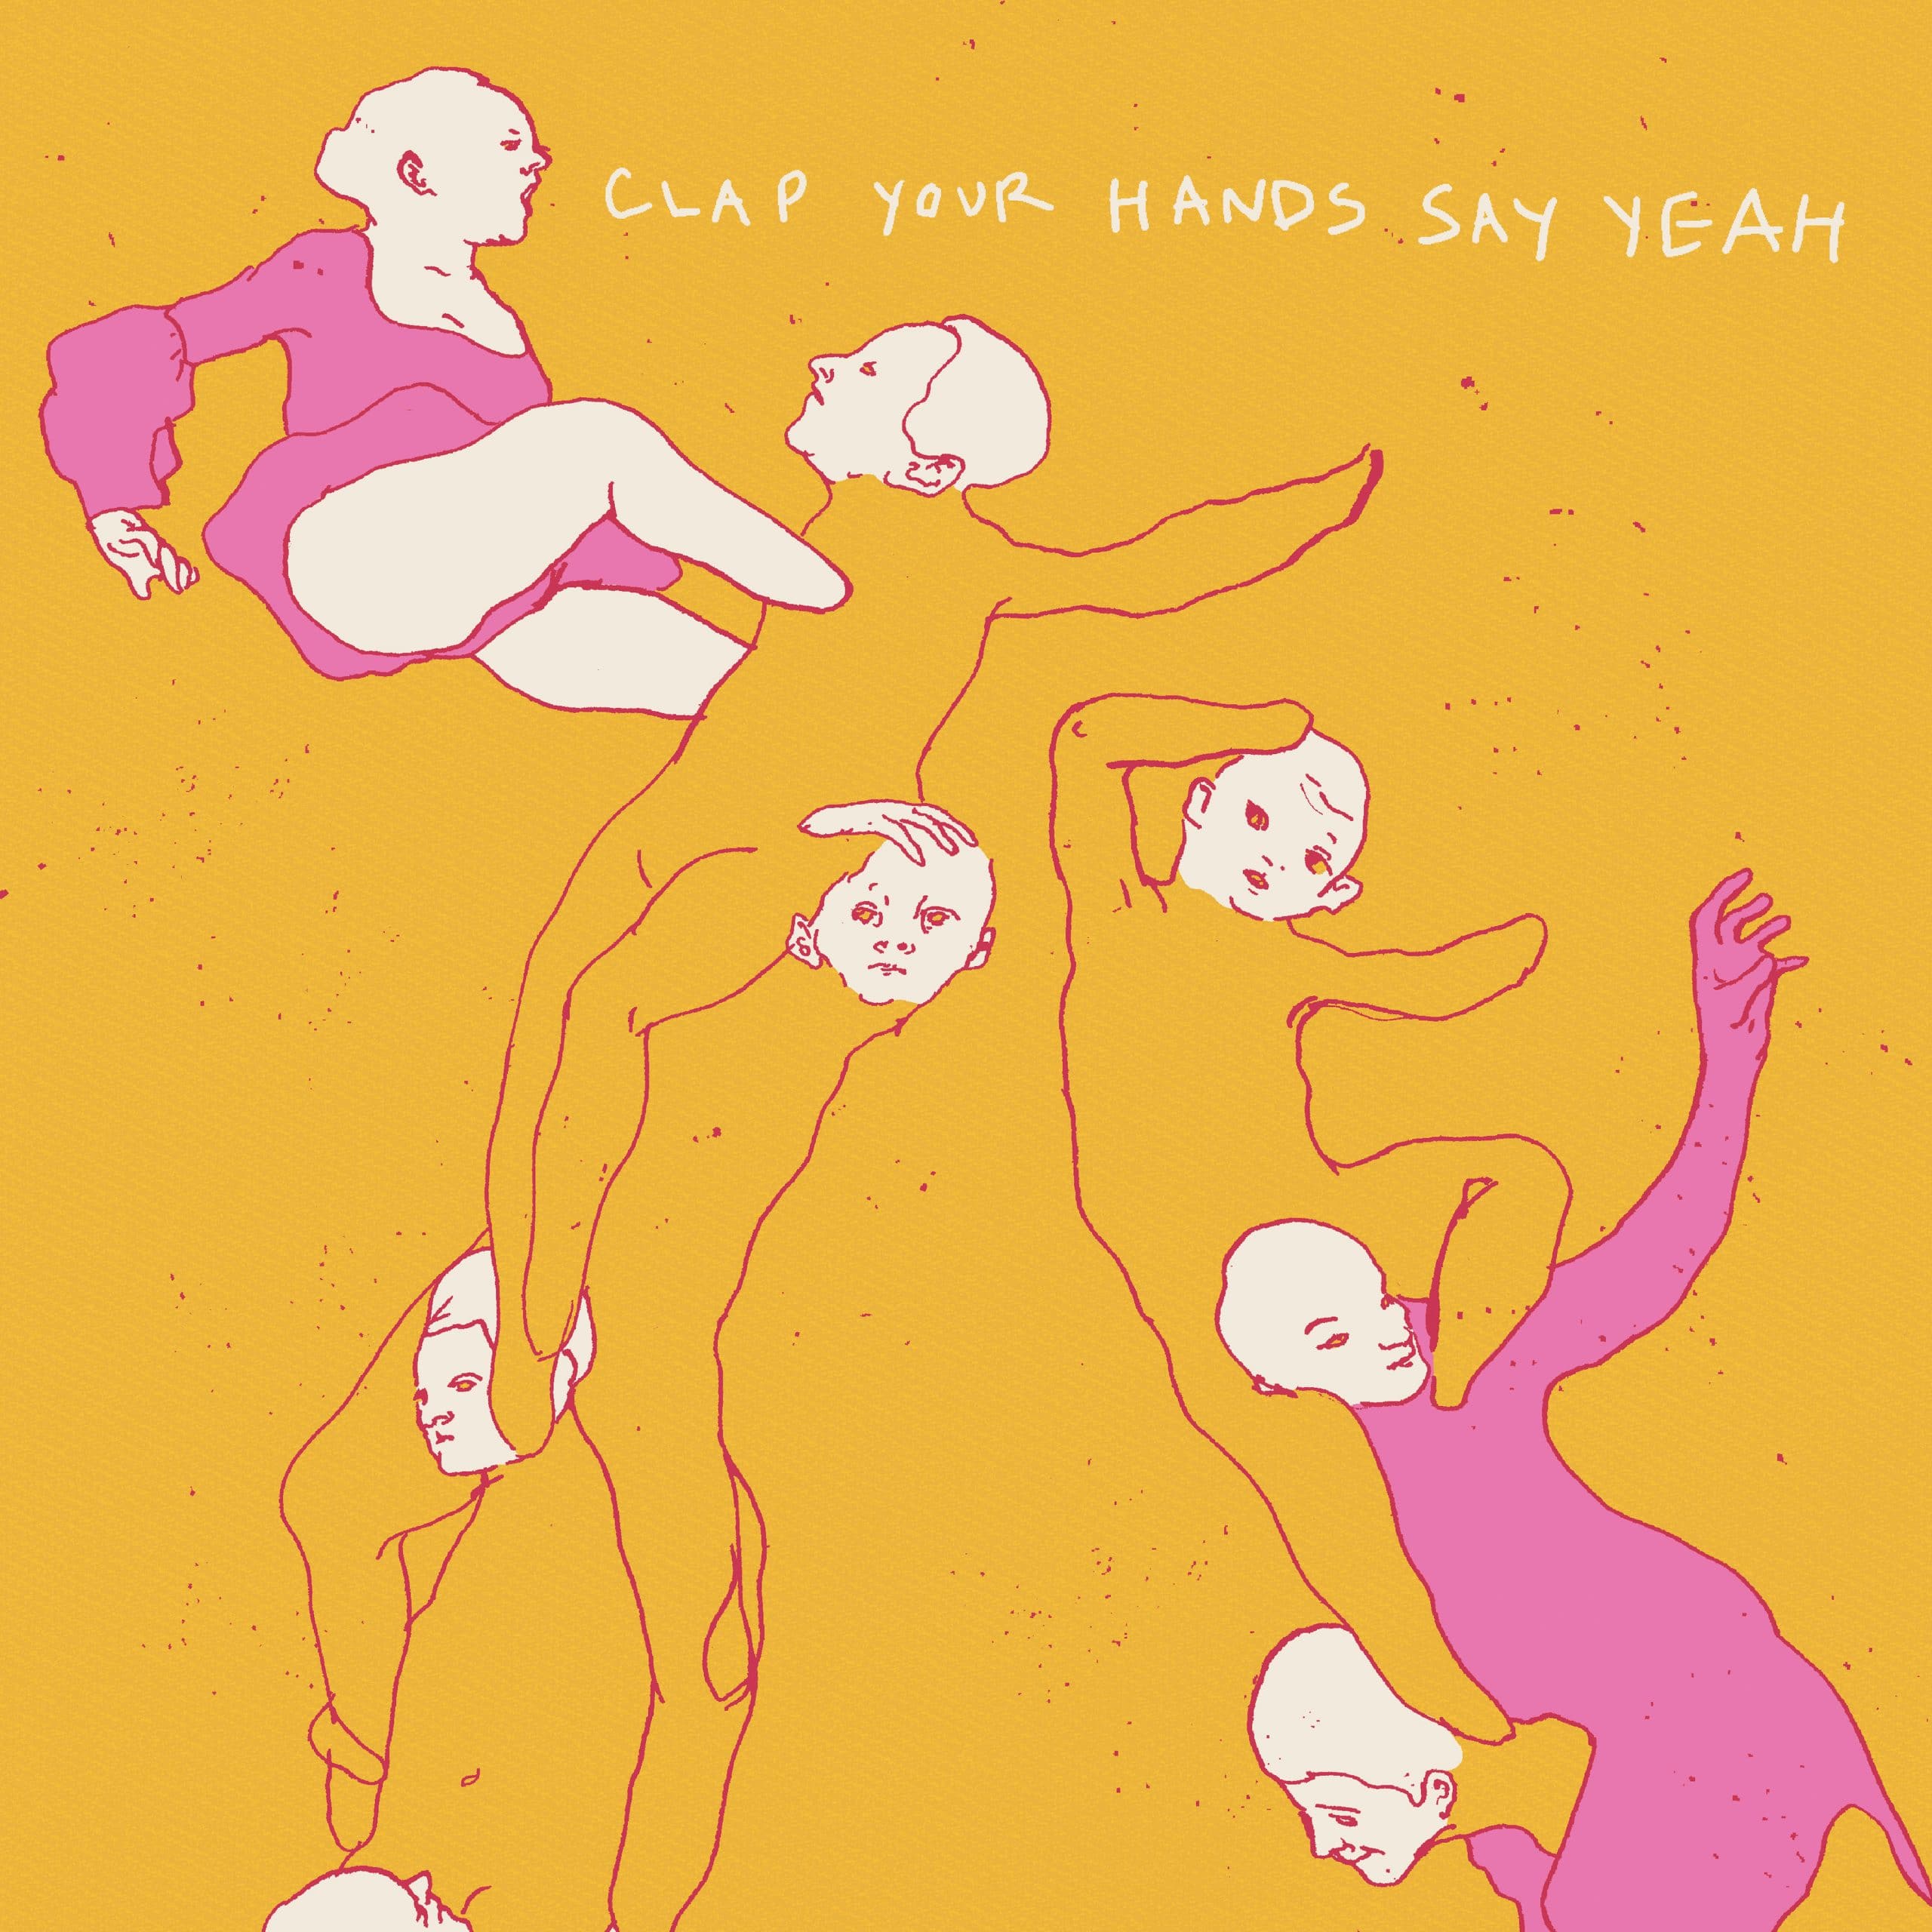 Clap Your Hands Say Yeah!